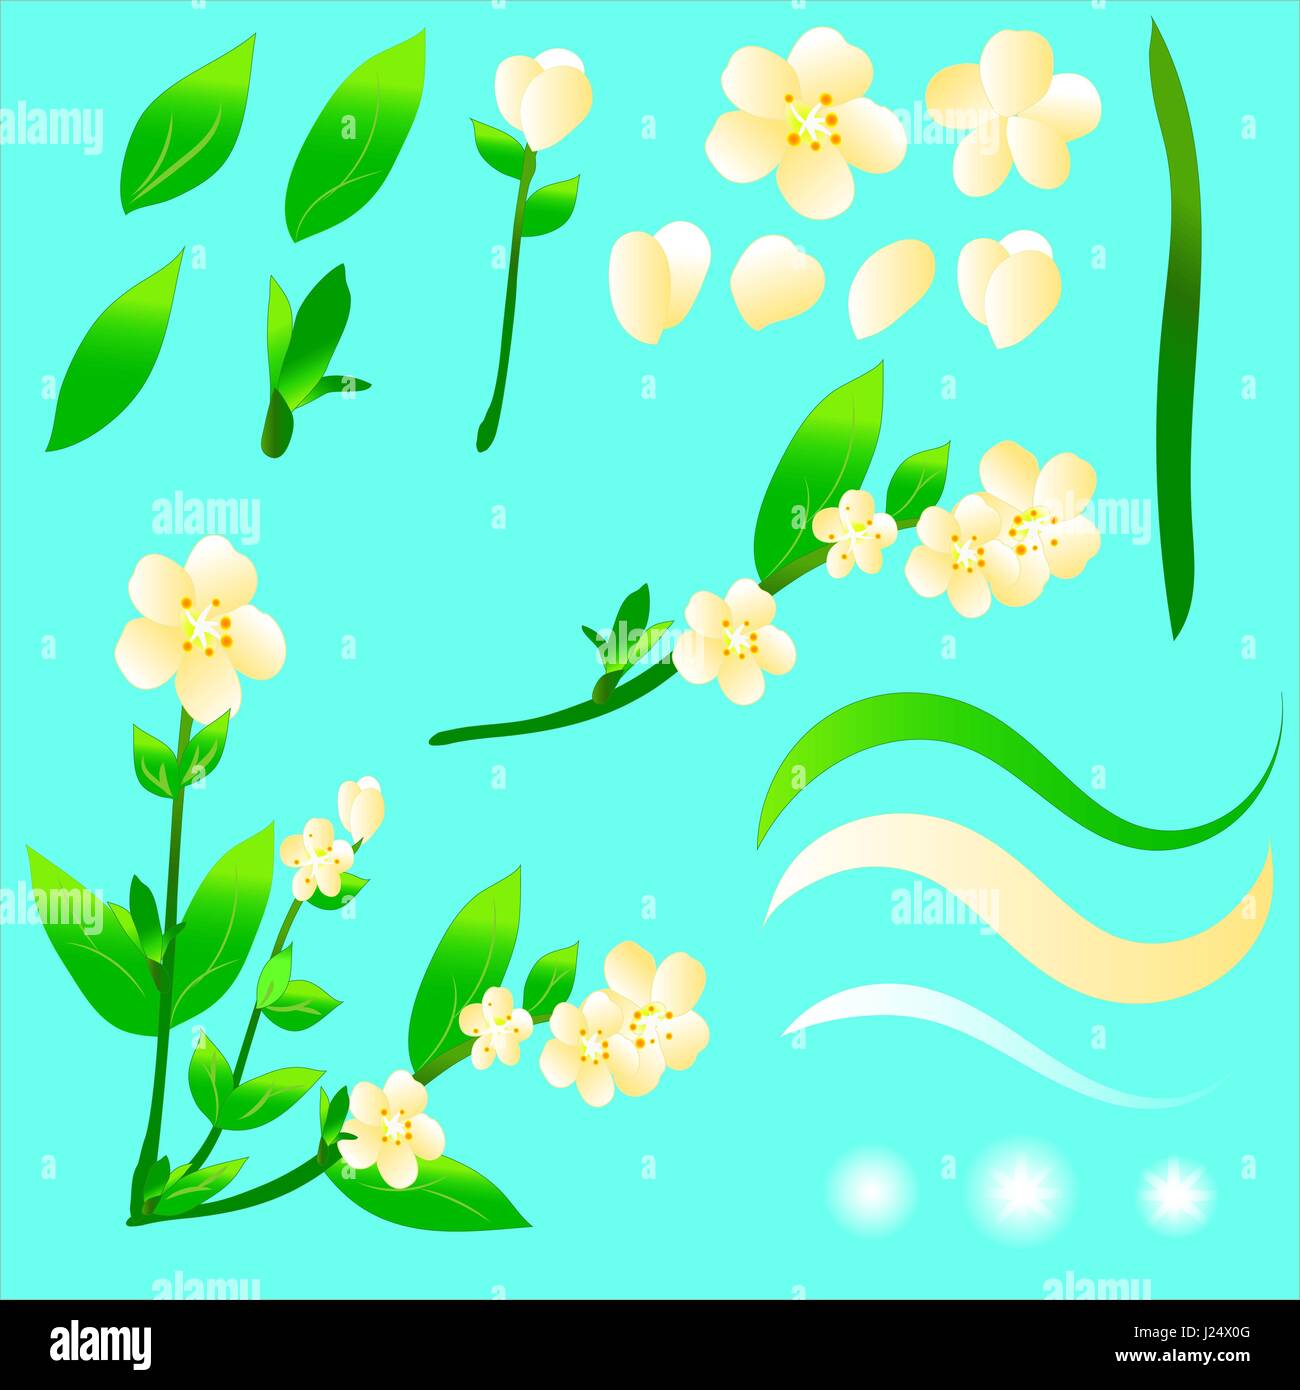 A set of summer yellow flowers and green leaves for drawing up a design. There is a gradient and transparency. EPS 10. Stock Vector